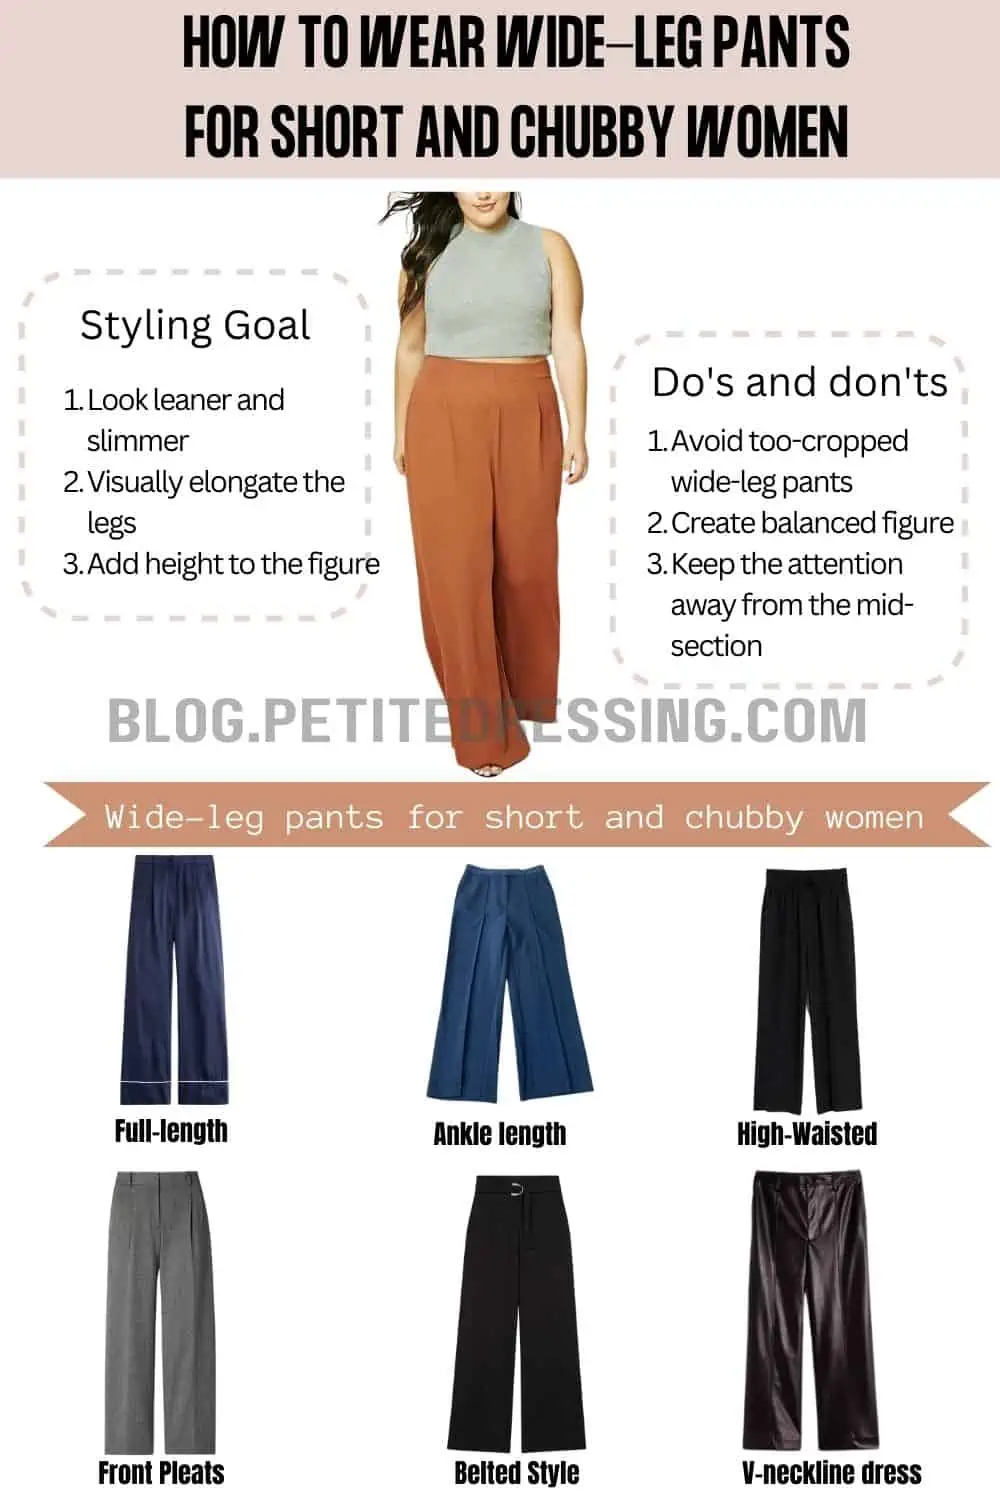 Wide Leg Pants Guide for Short and Chubby Women - Petite Dressing